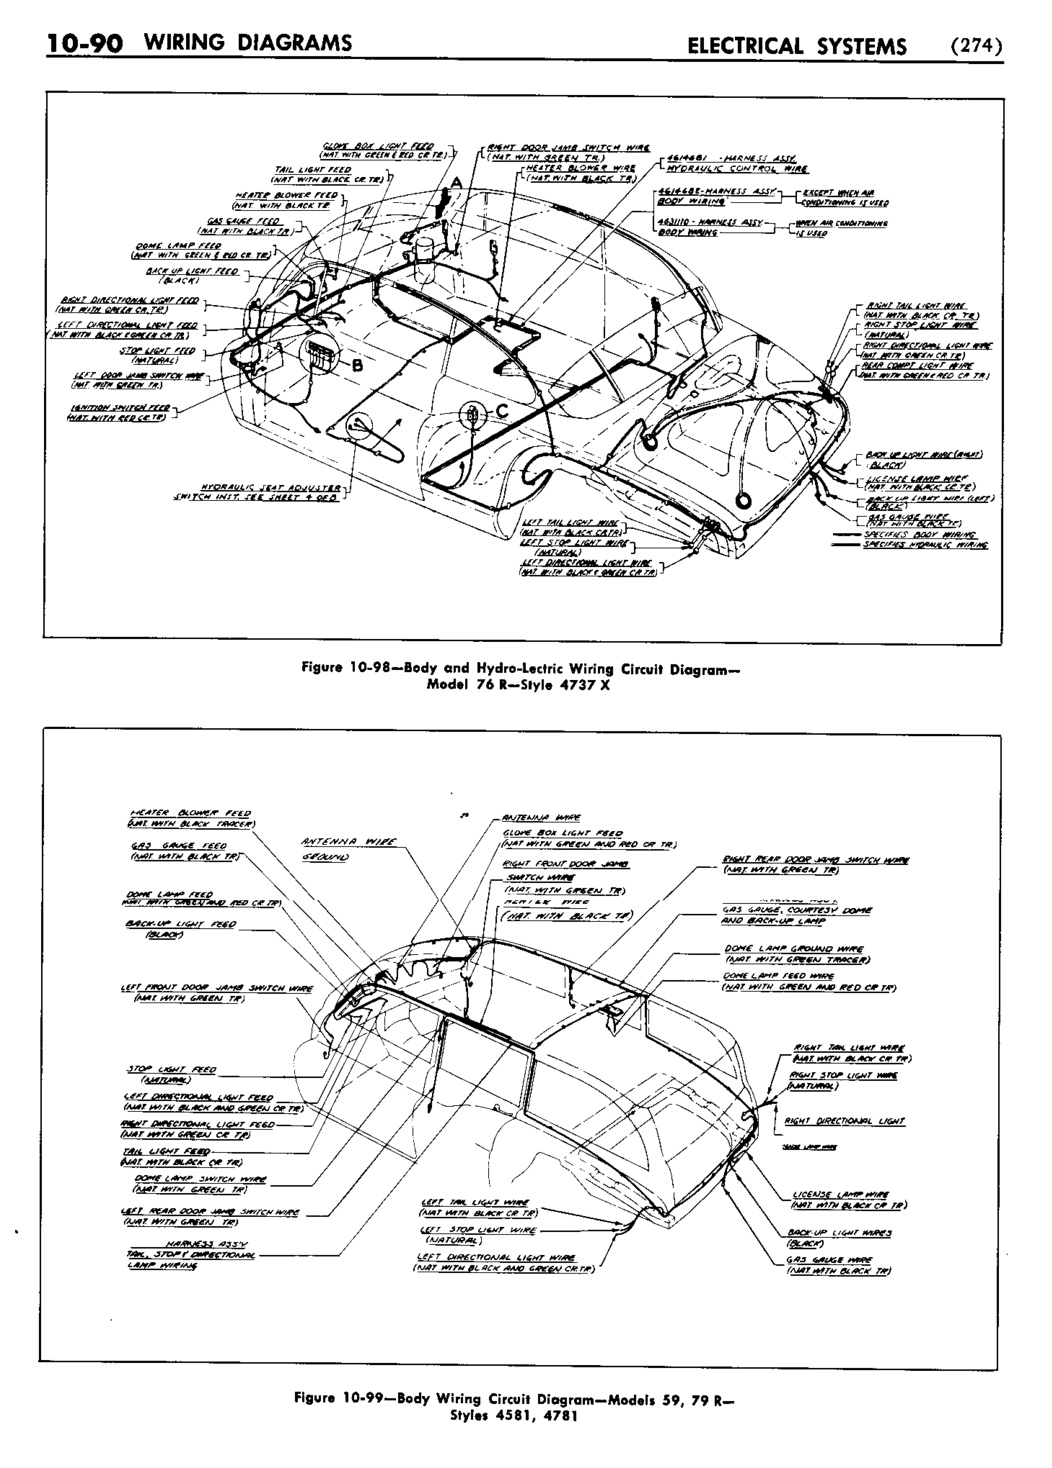 n_11 1953 Buick Shop Manual - Electrical Systems-091-091.jpg